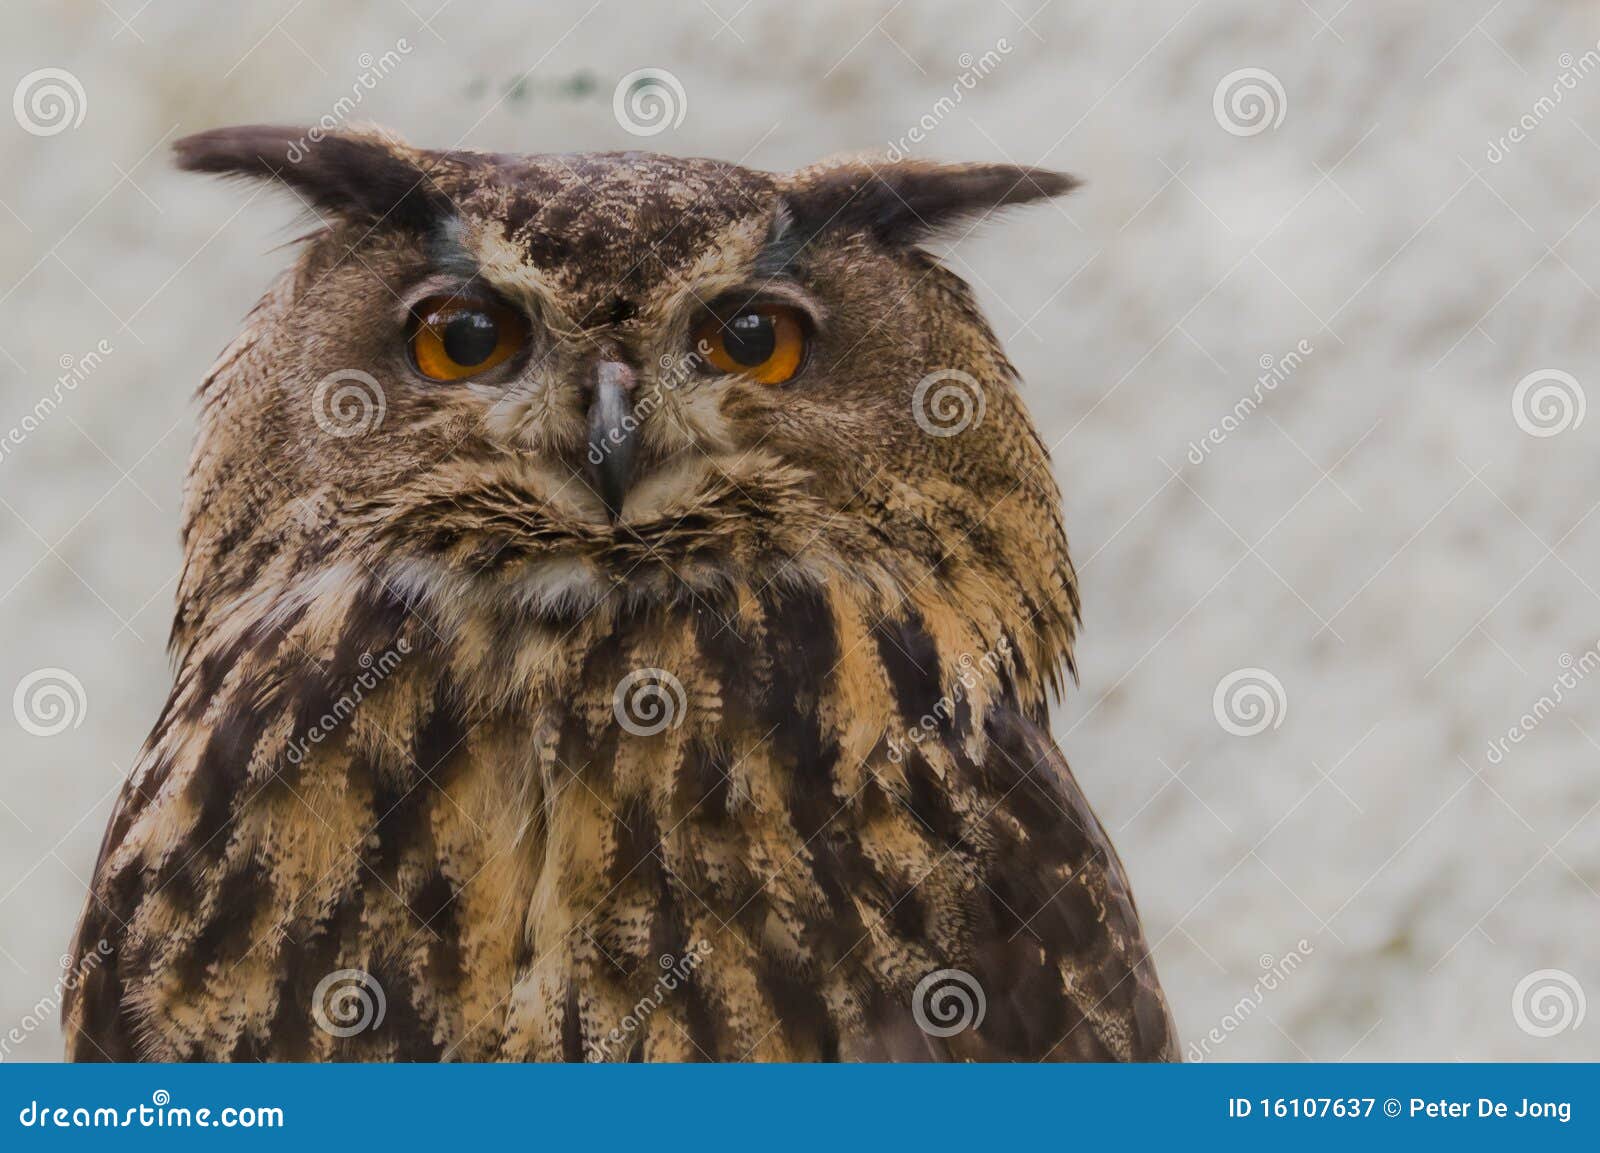 Eagle-Owl Searching for Prey Stock Image - Image of feathers, close ...